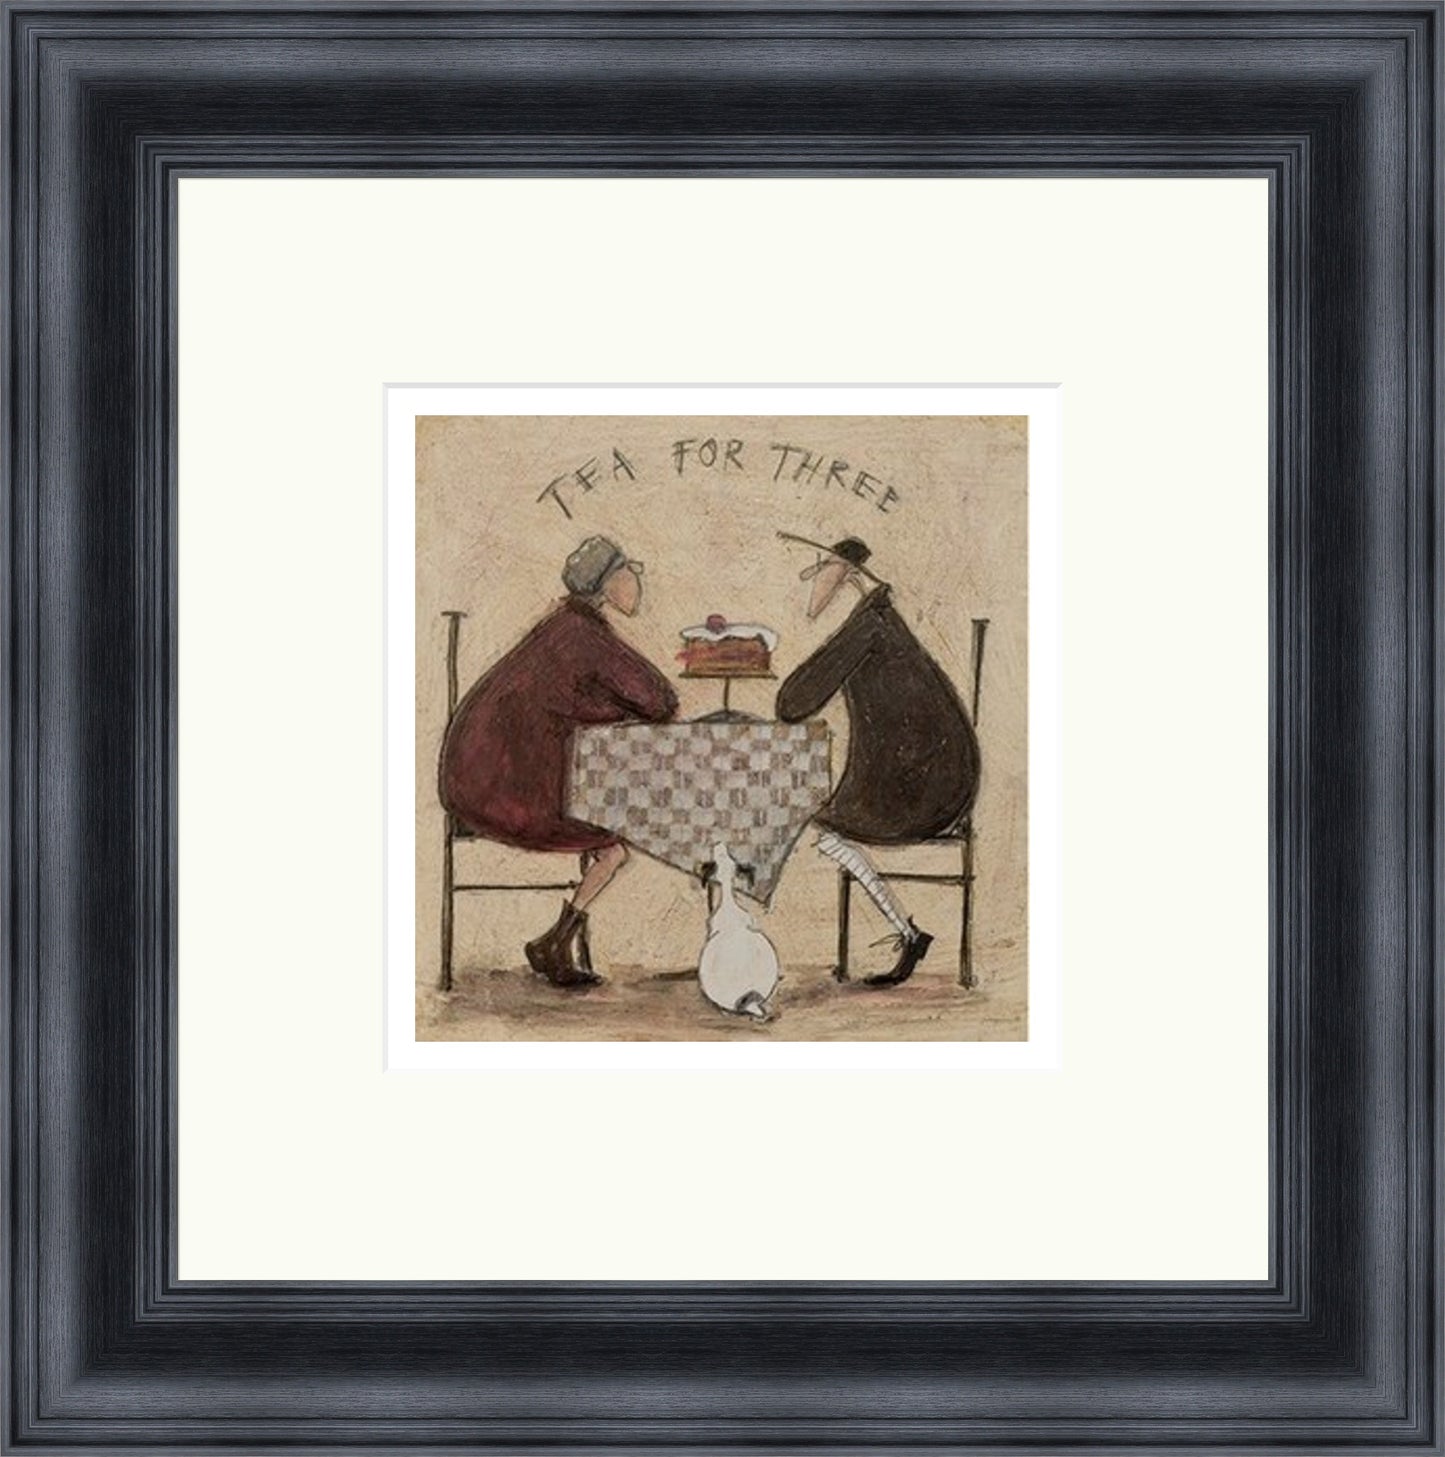 Tea for Three 2 by Sam Toft